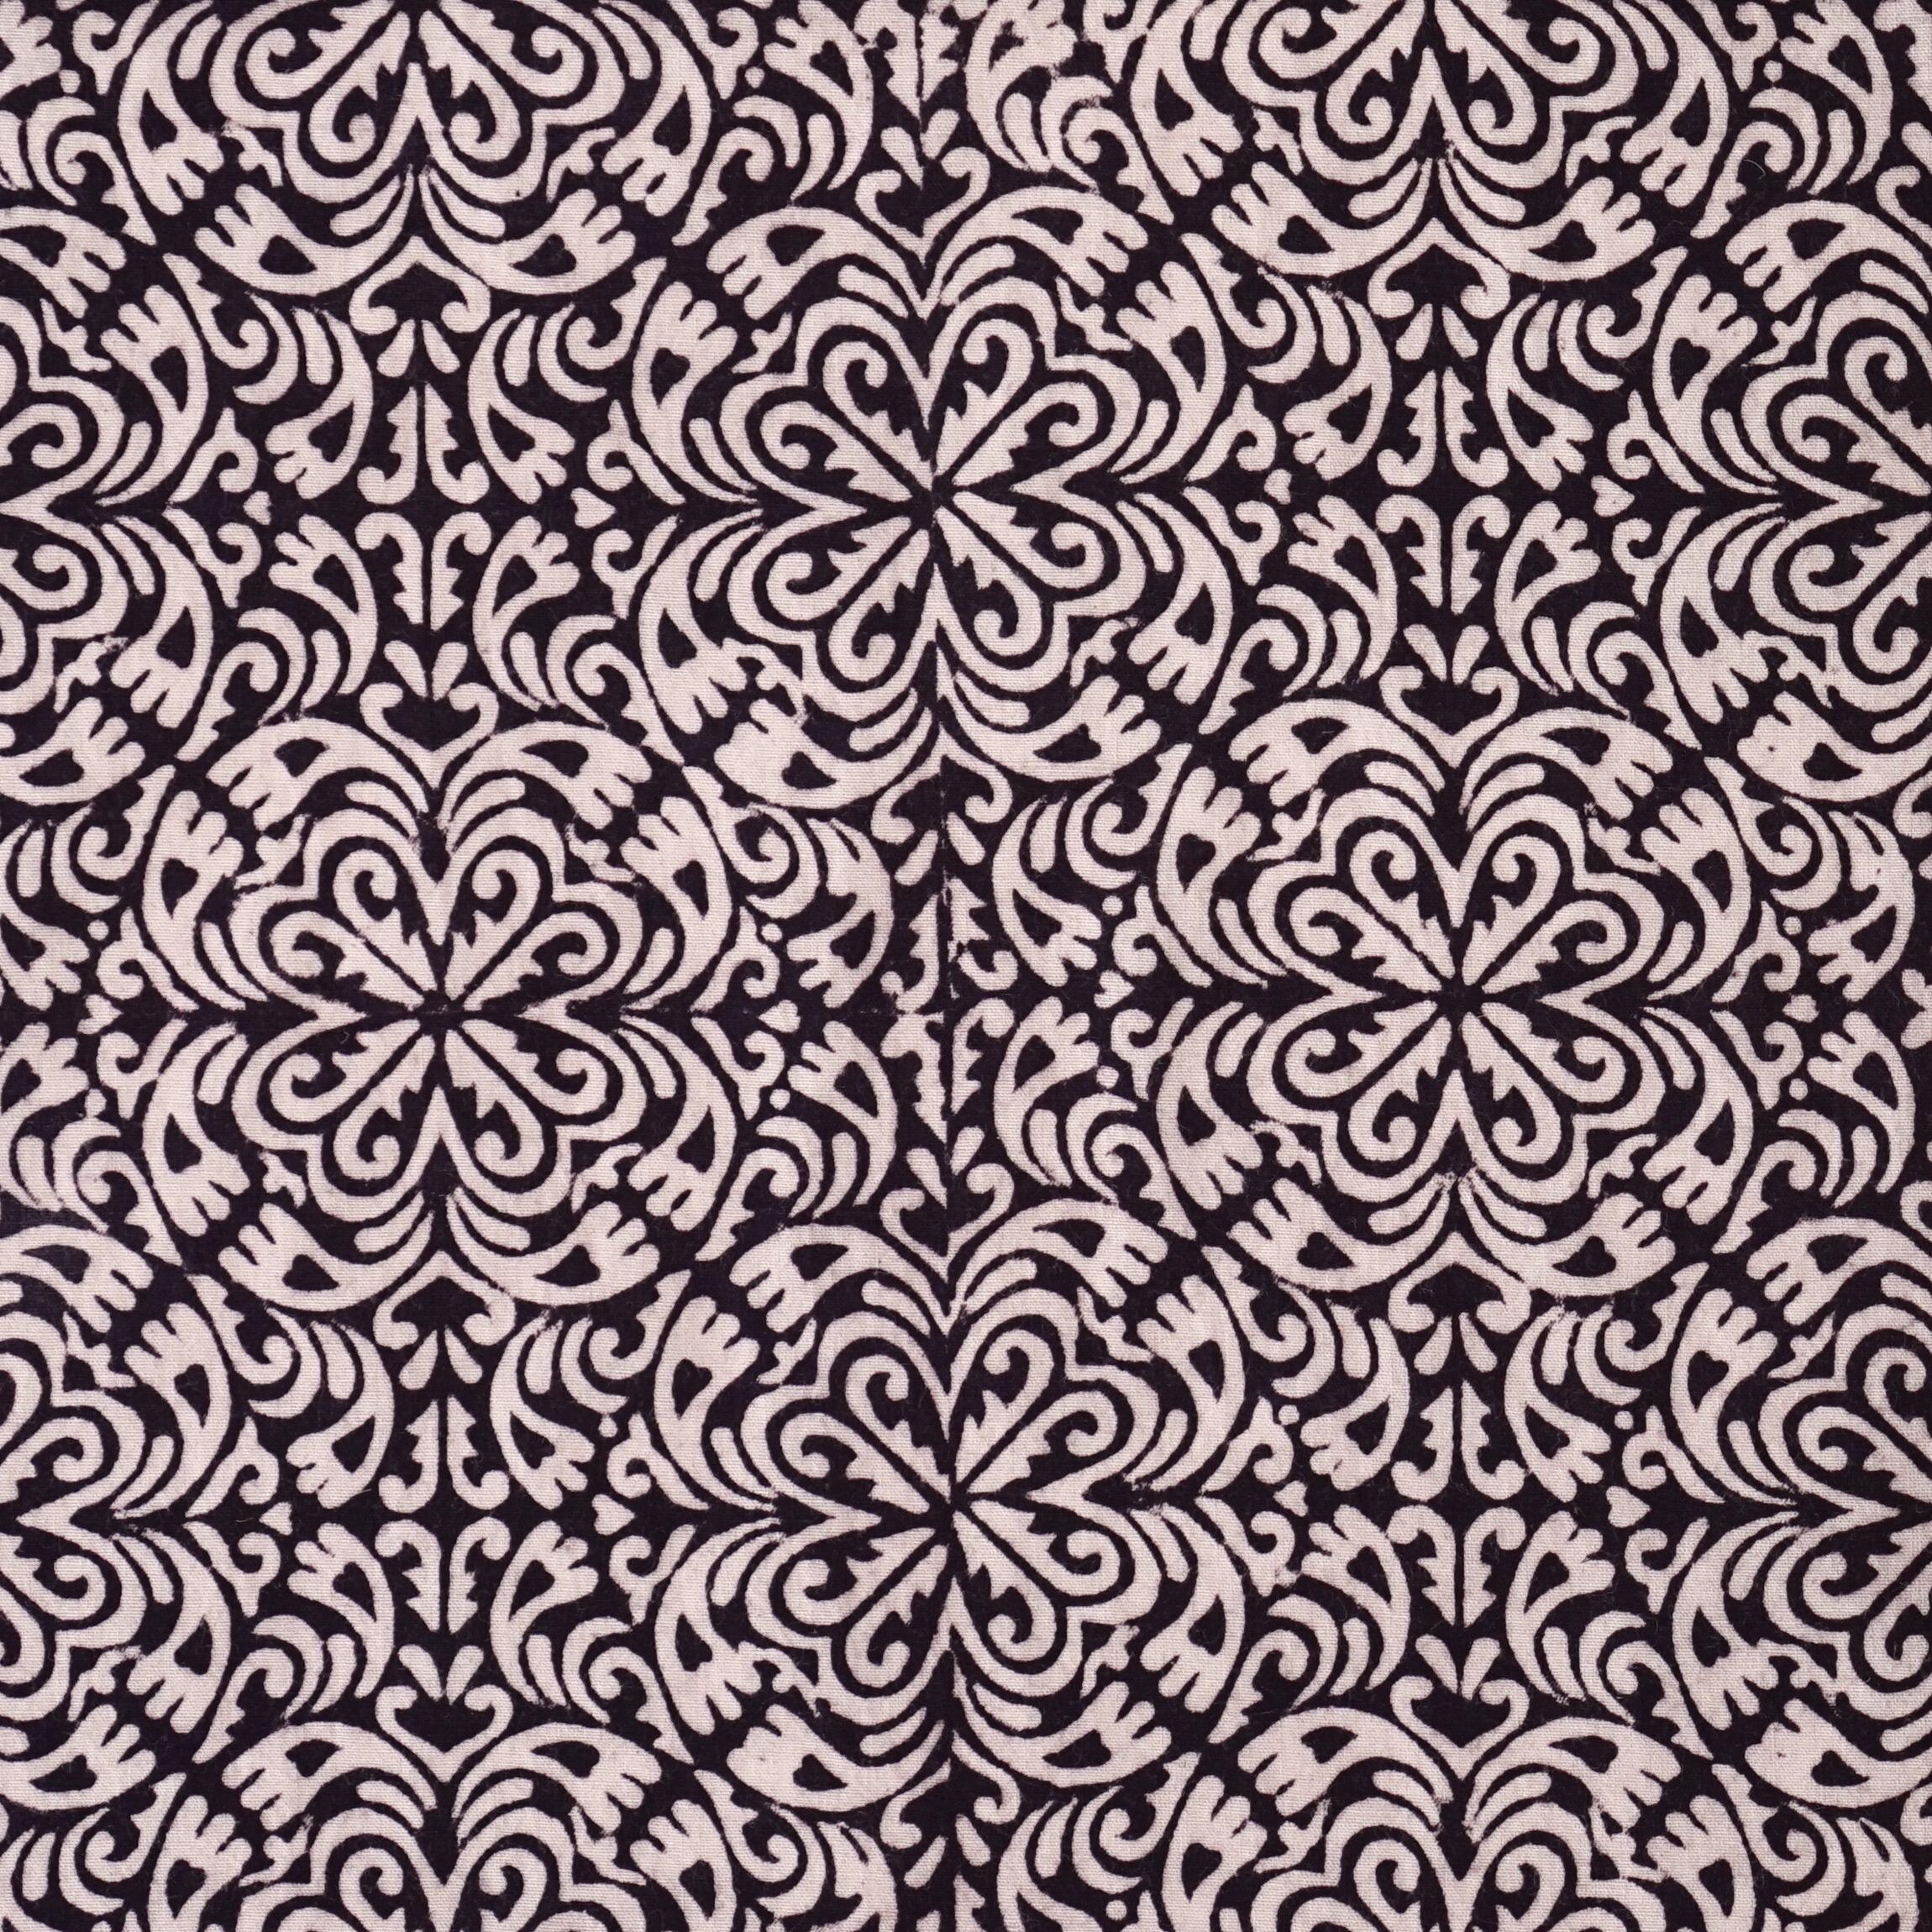 100% Block-Printed Cotton Fabric From India - Bagh Printing Method - Psychadelia Design - Flat